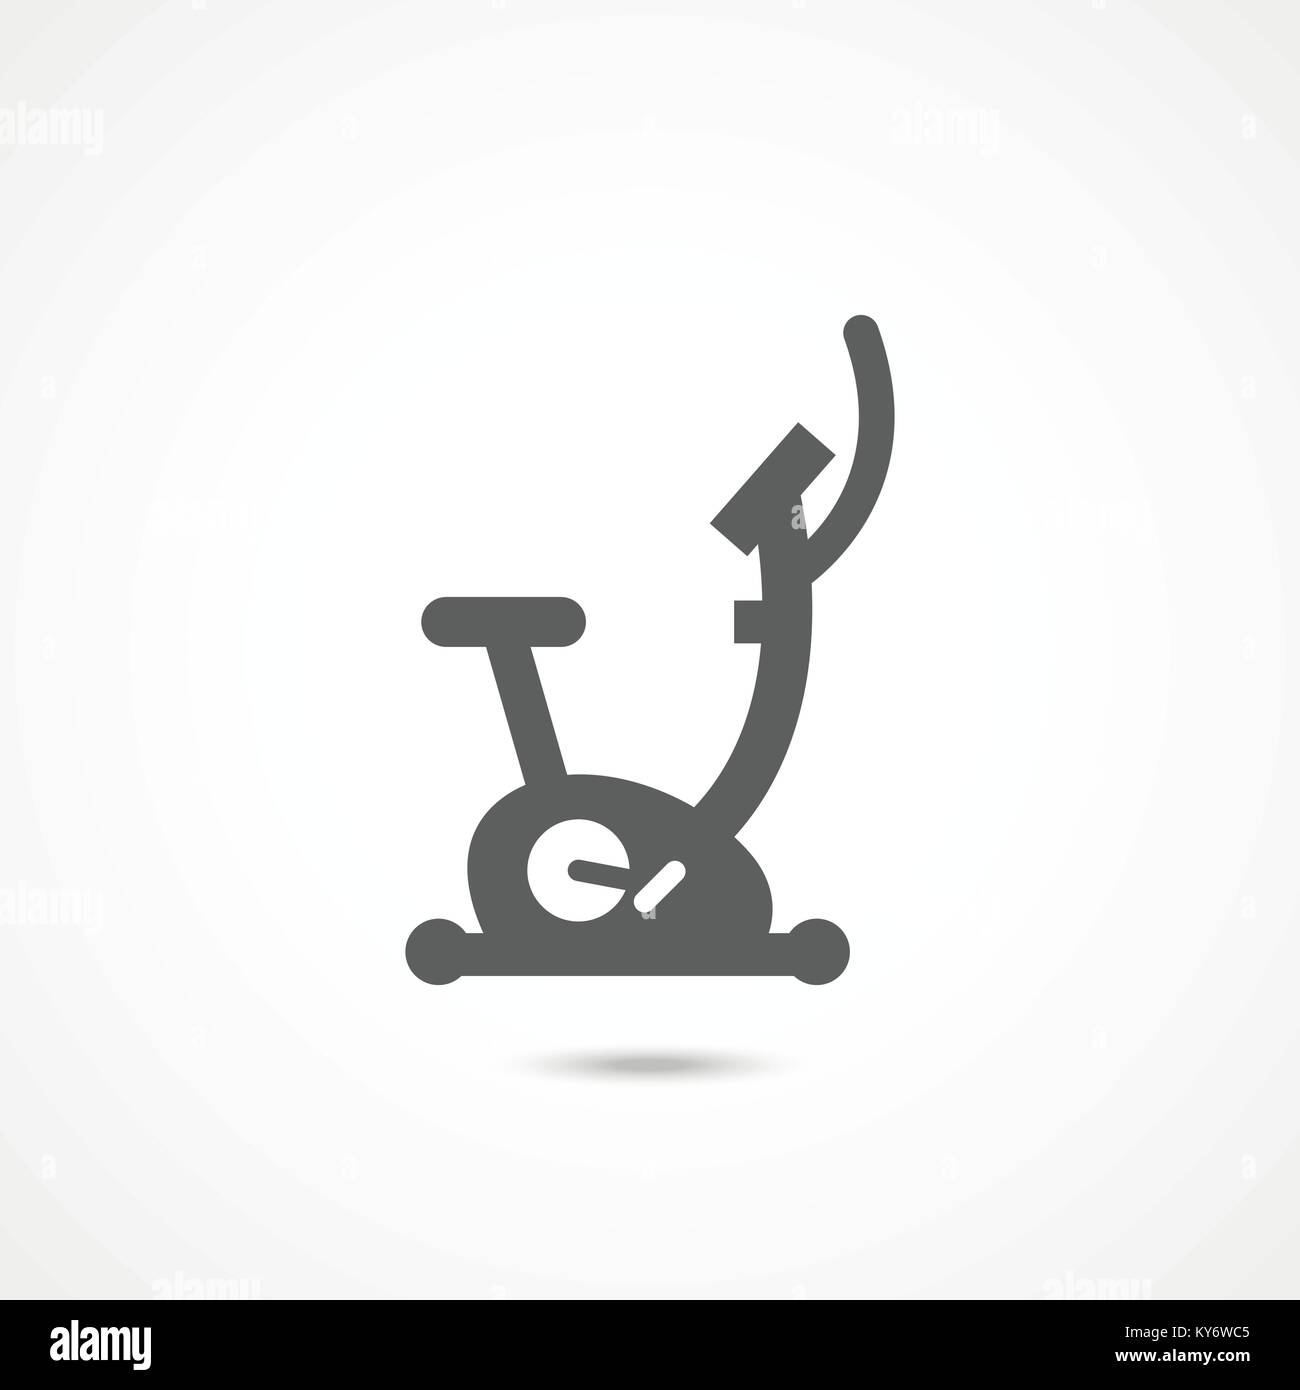 Stationary bicycle icon Stock Vector